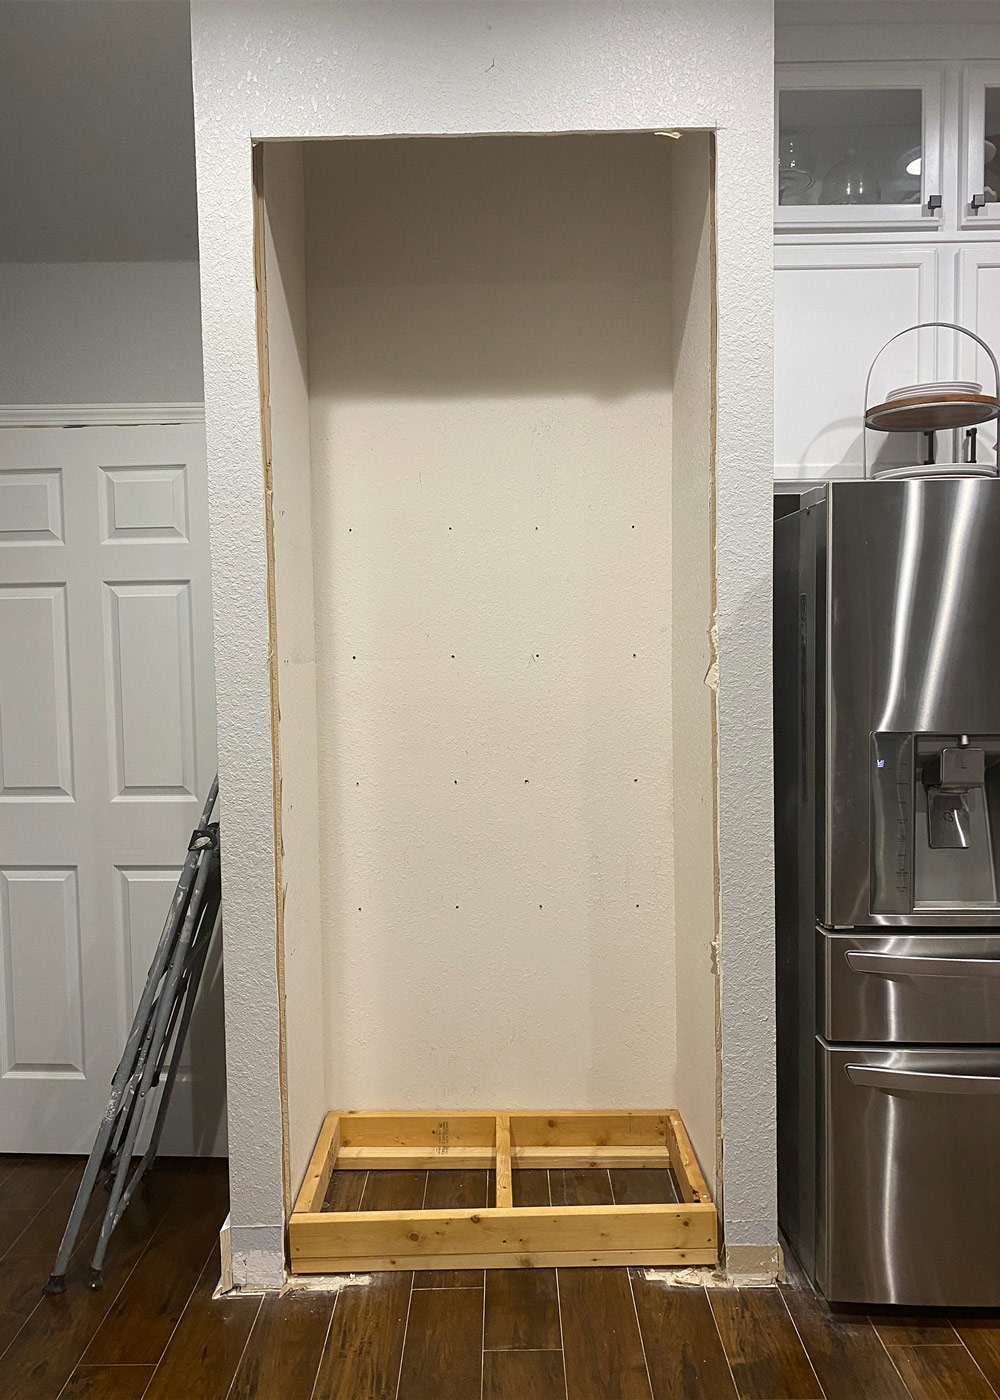 DIY Paint Booth - Sawdust 2 Stitches